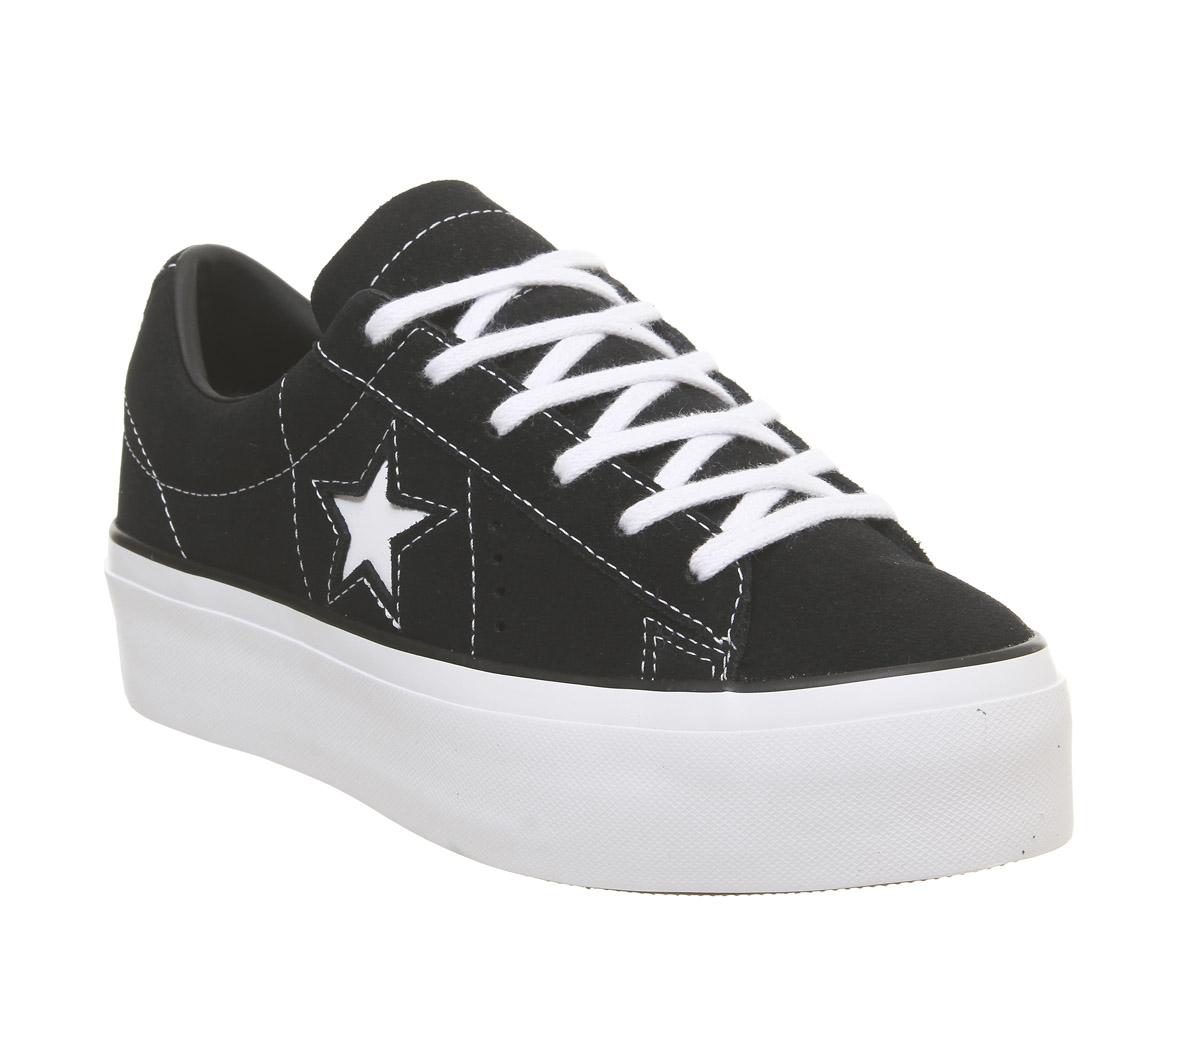 size converse one star